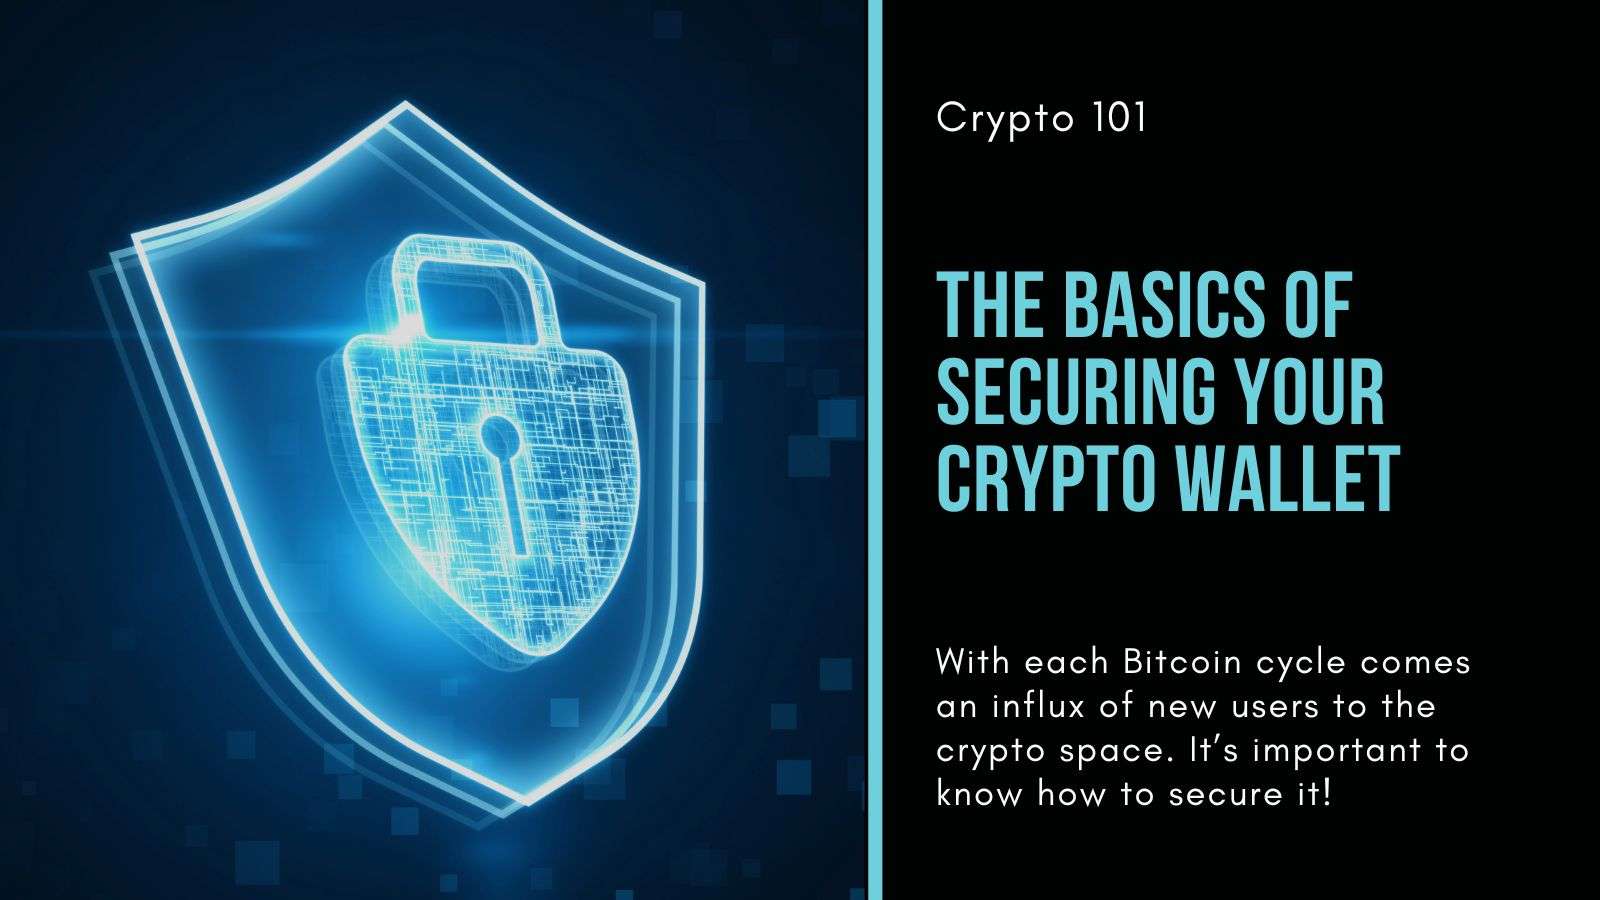 Securing Your Crypto Wallet